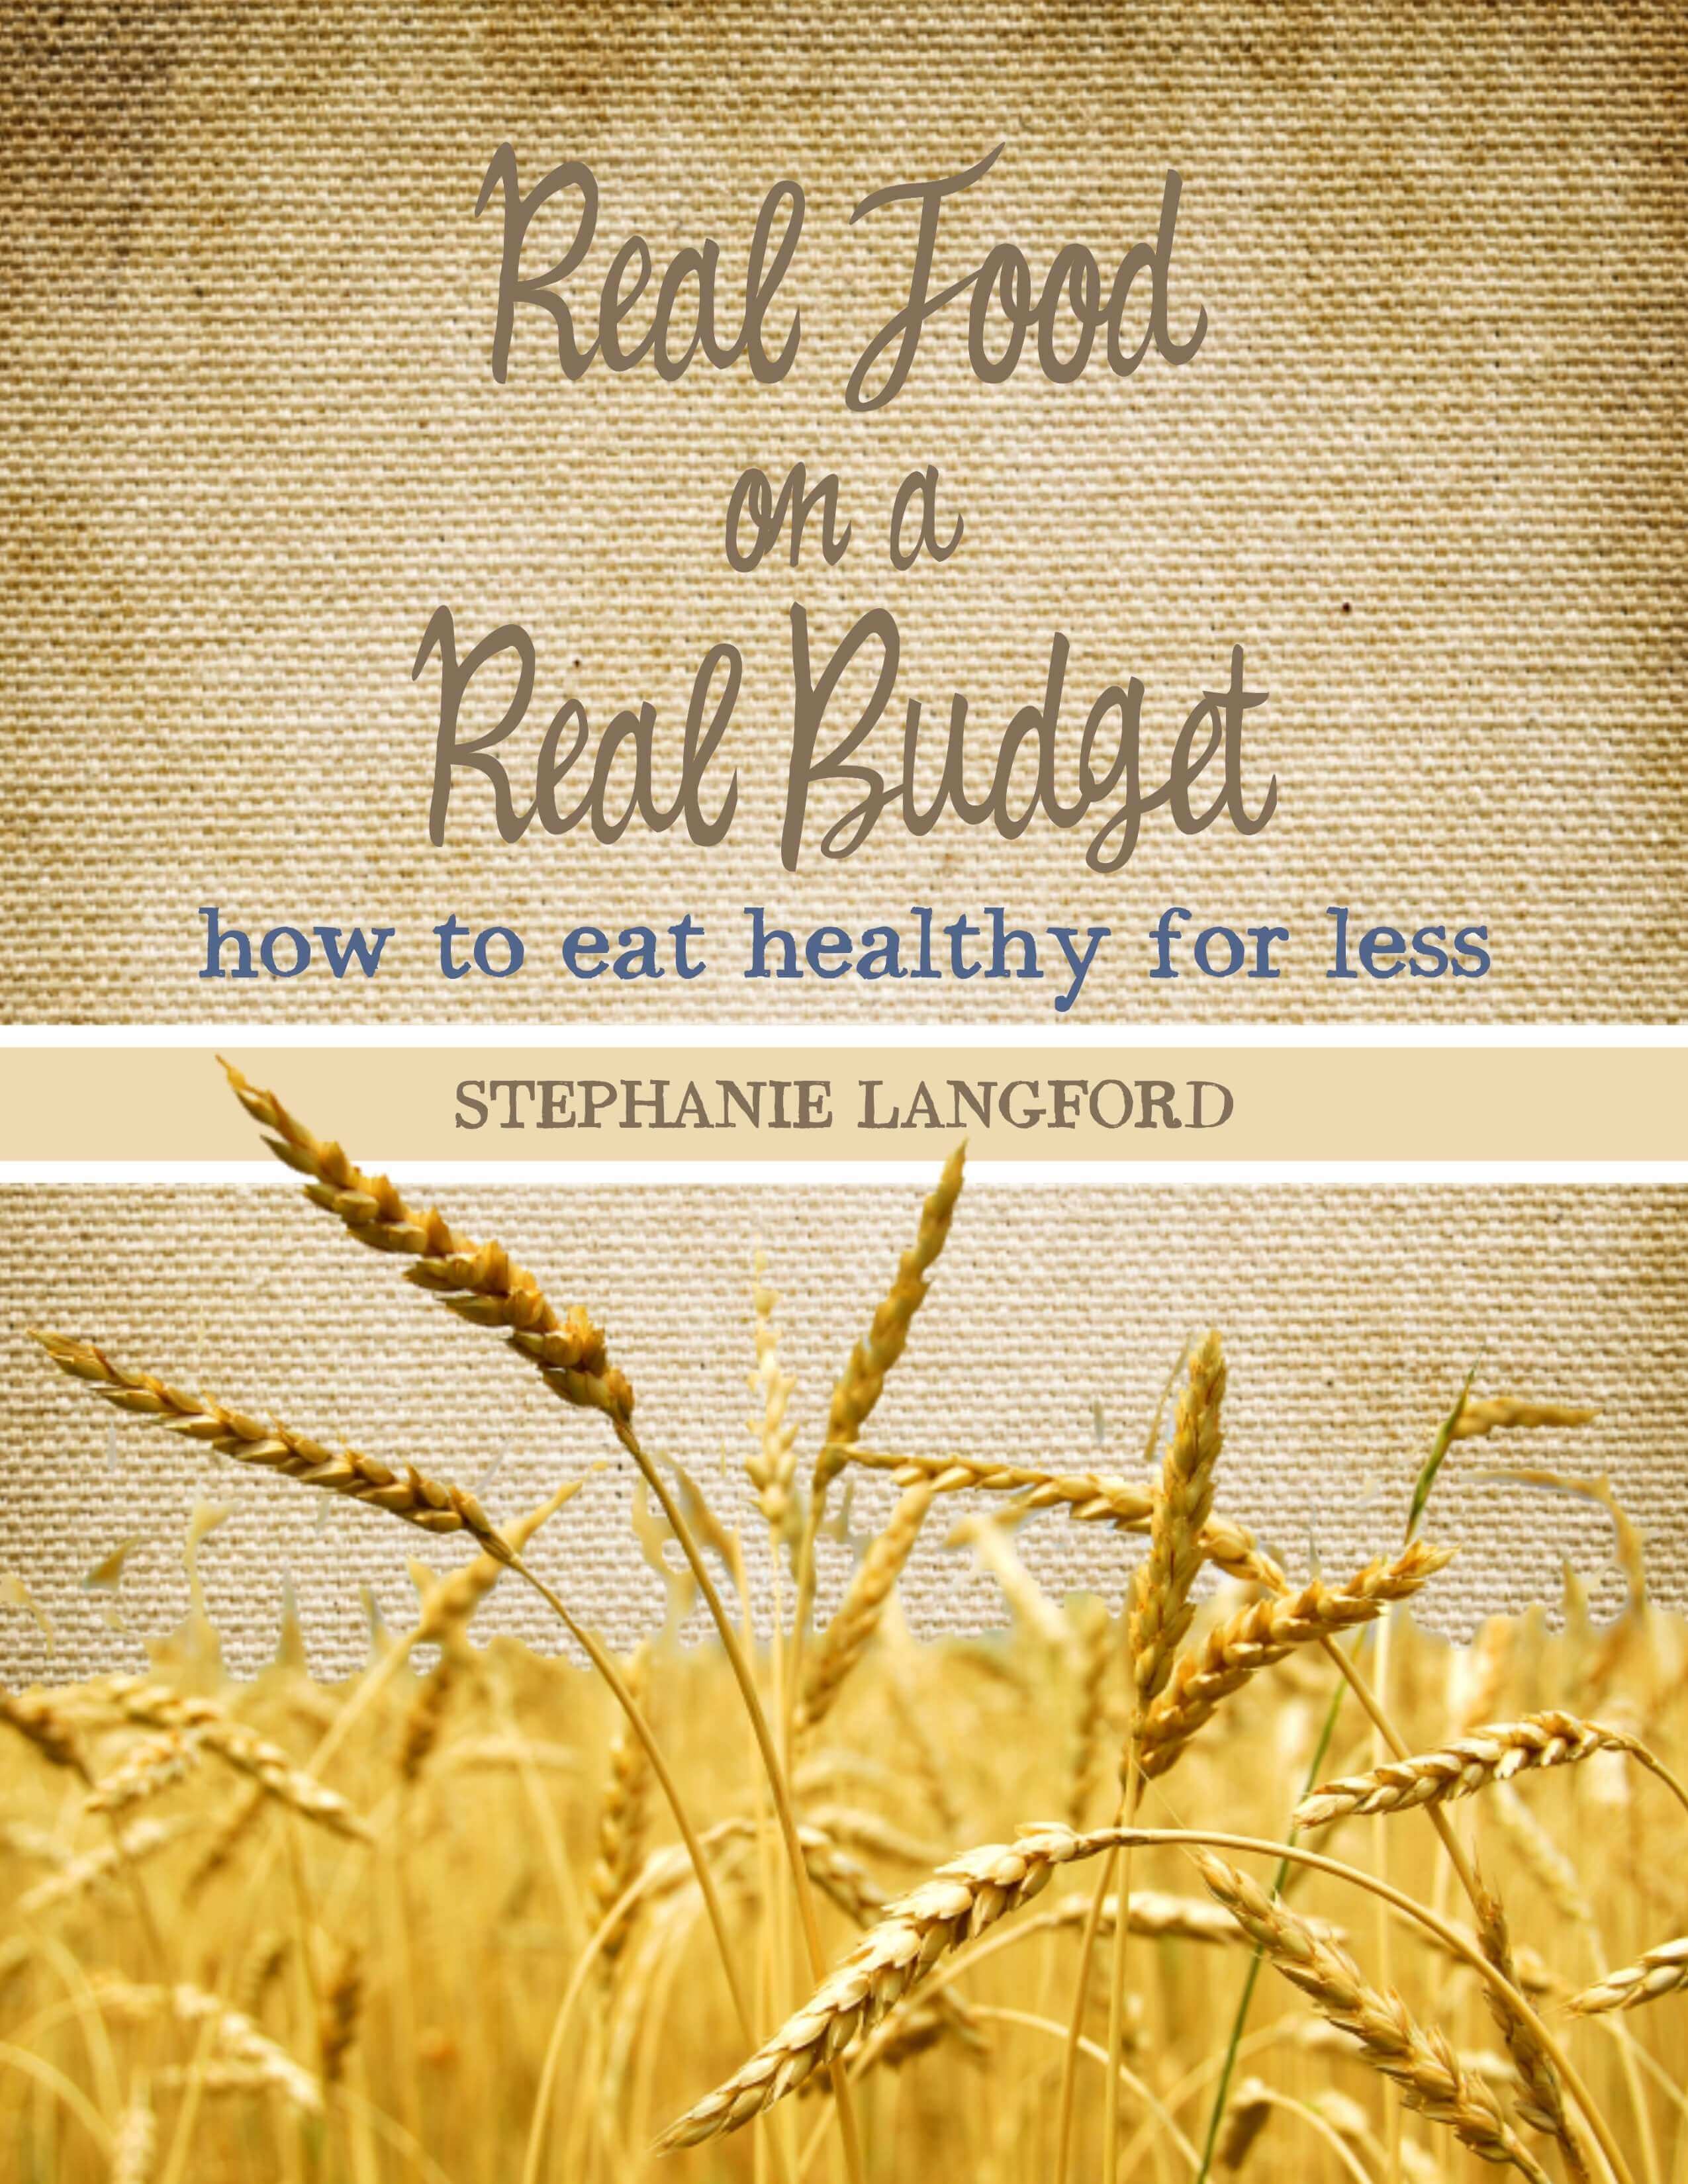 good frugal food book cover 22